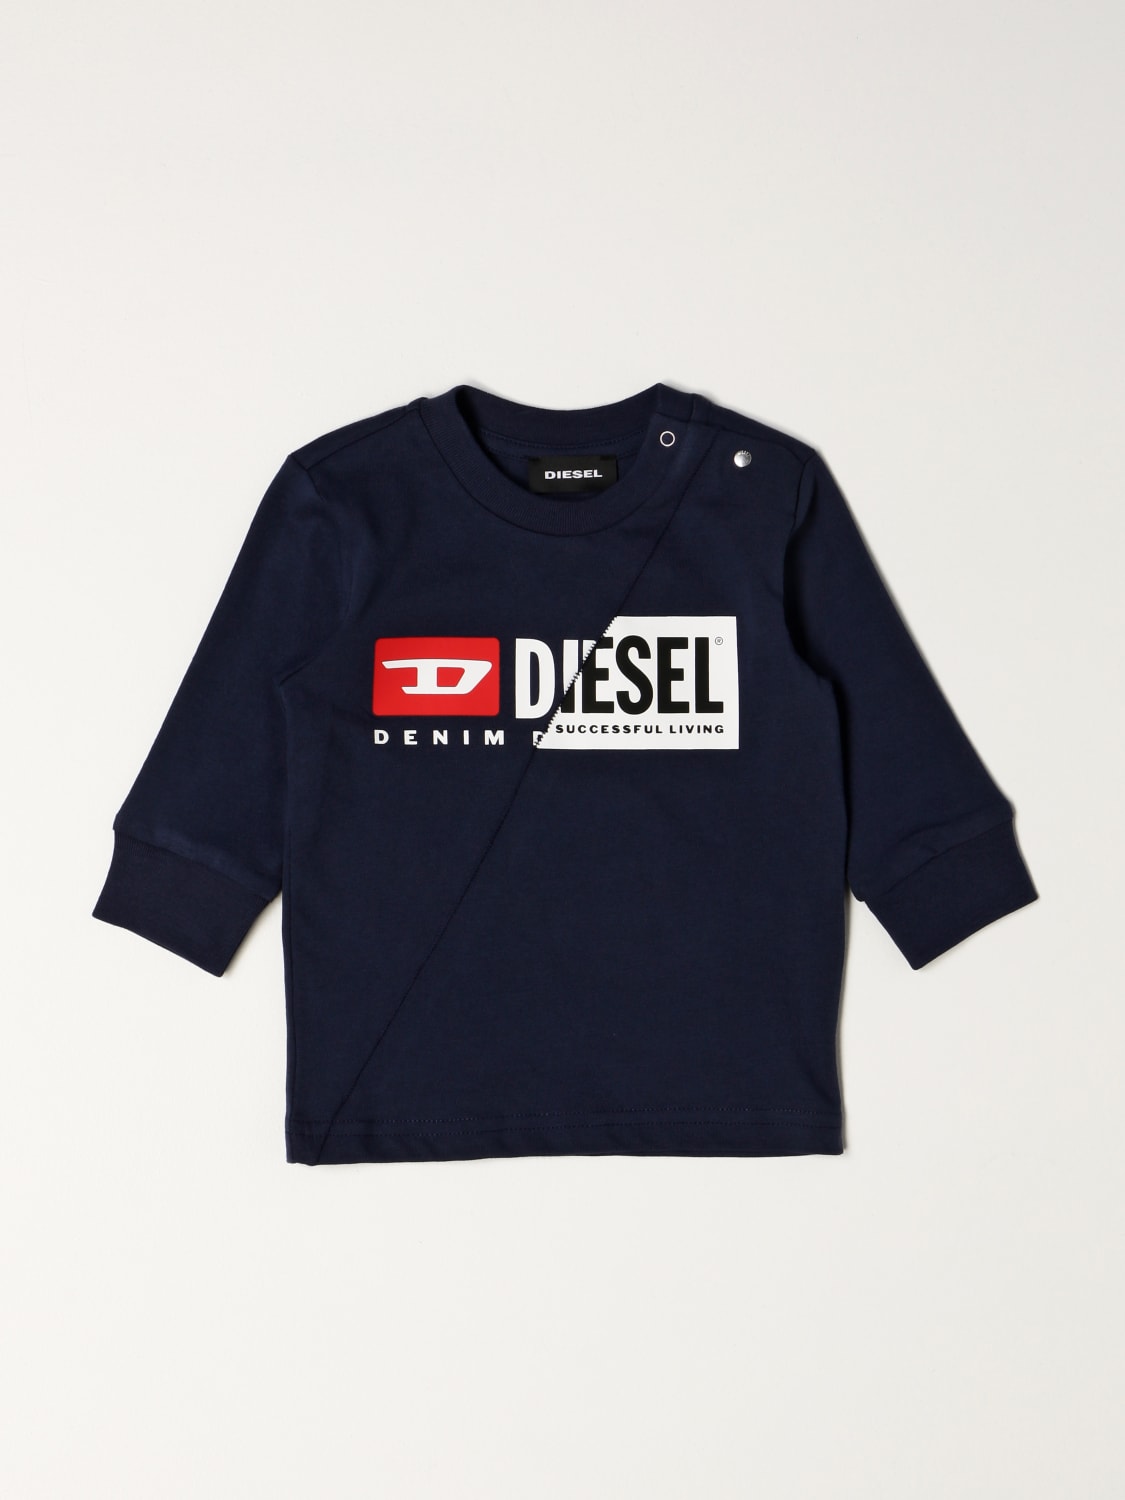 Diesel Outlet: cotton t-shirt with online | Blue t-shirt Diesel at 00YI9 - 00K296 logo